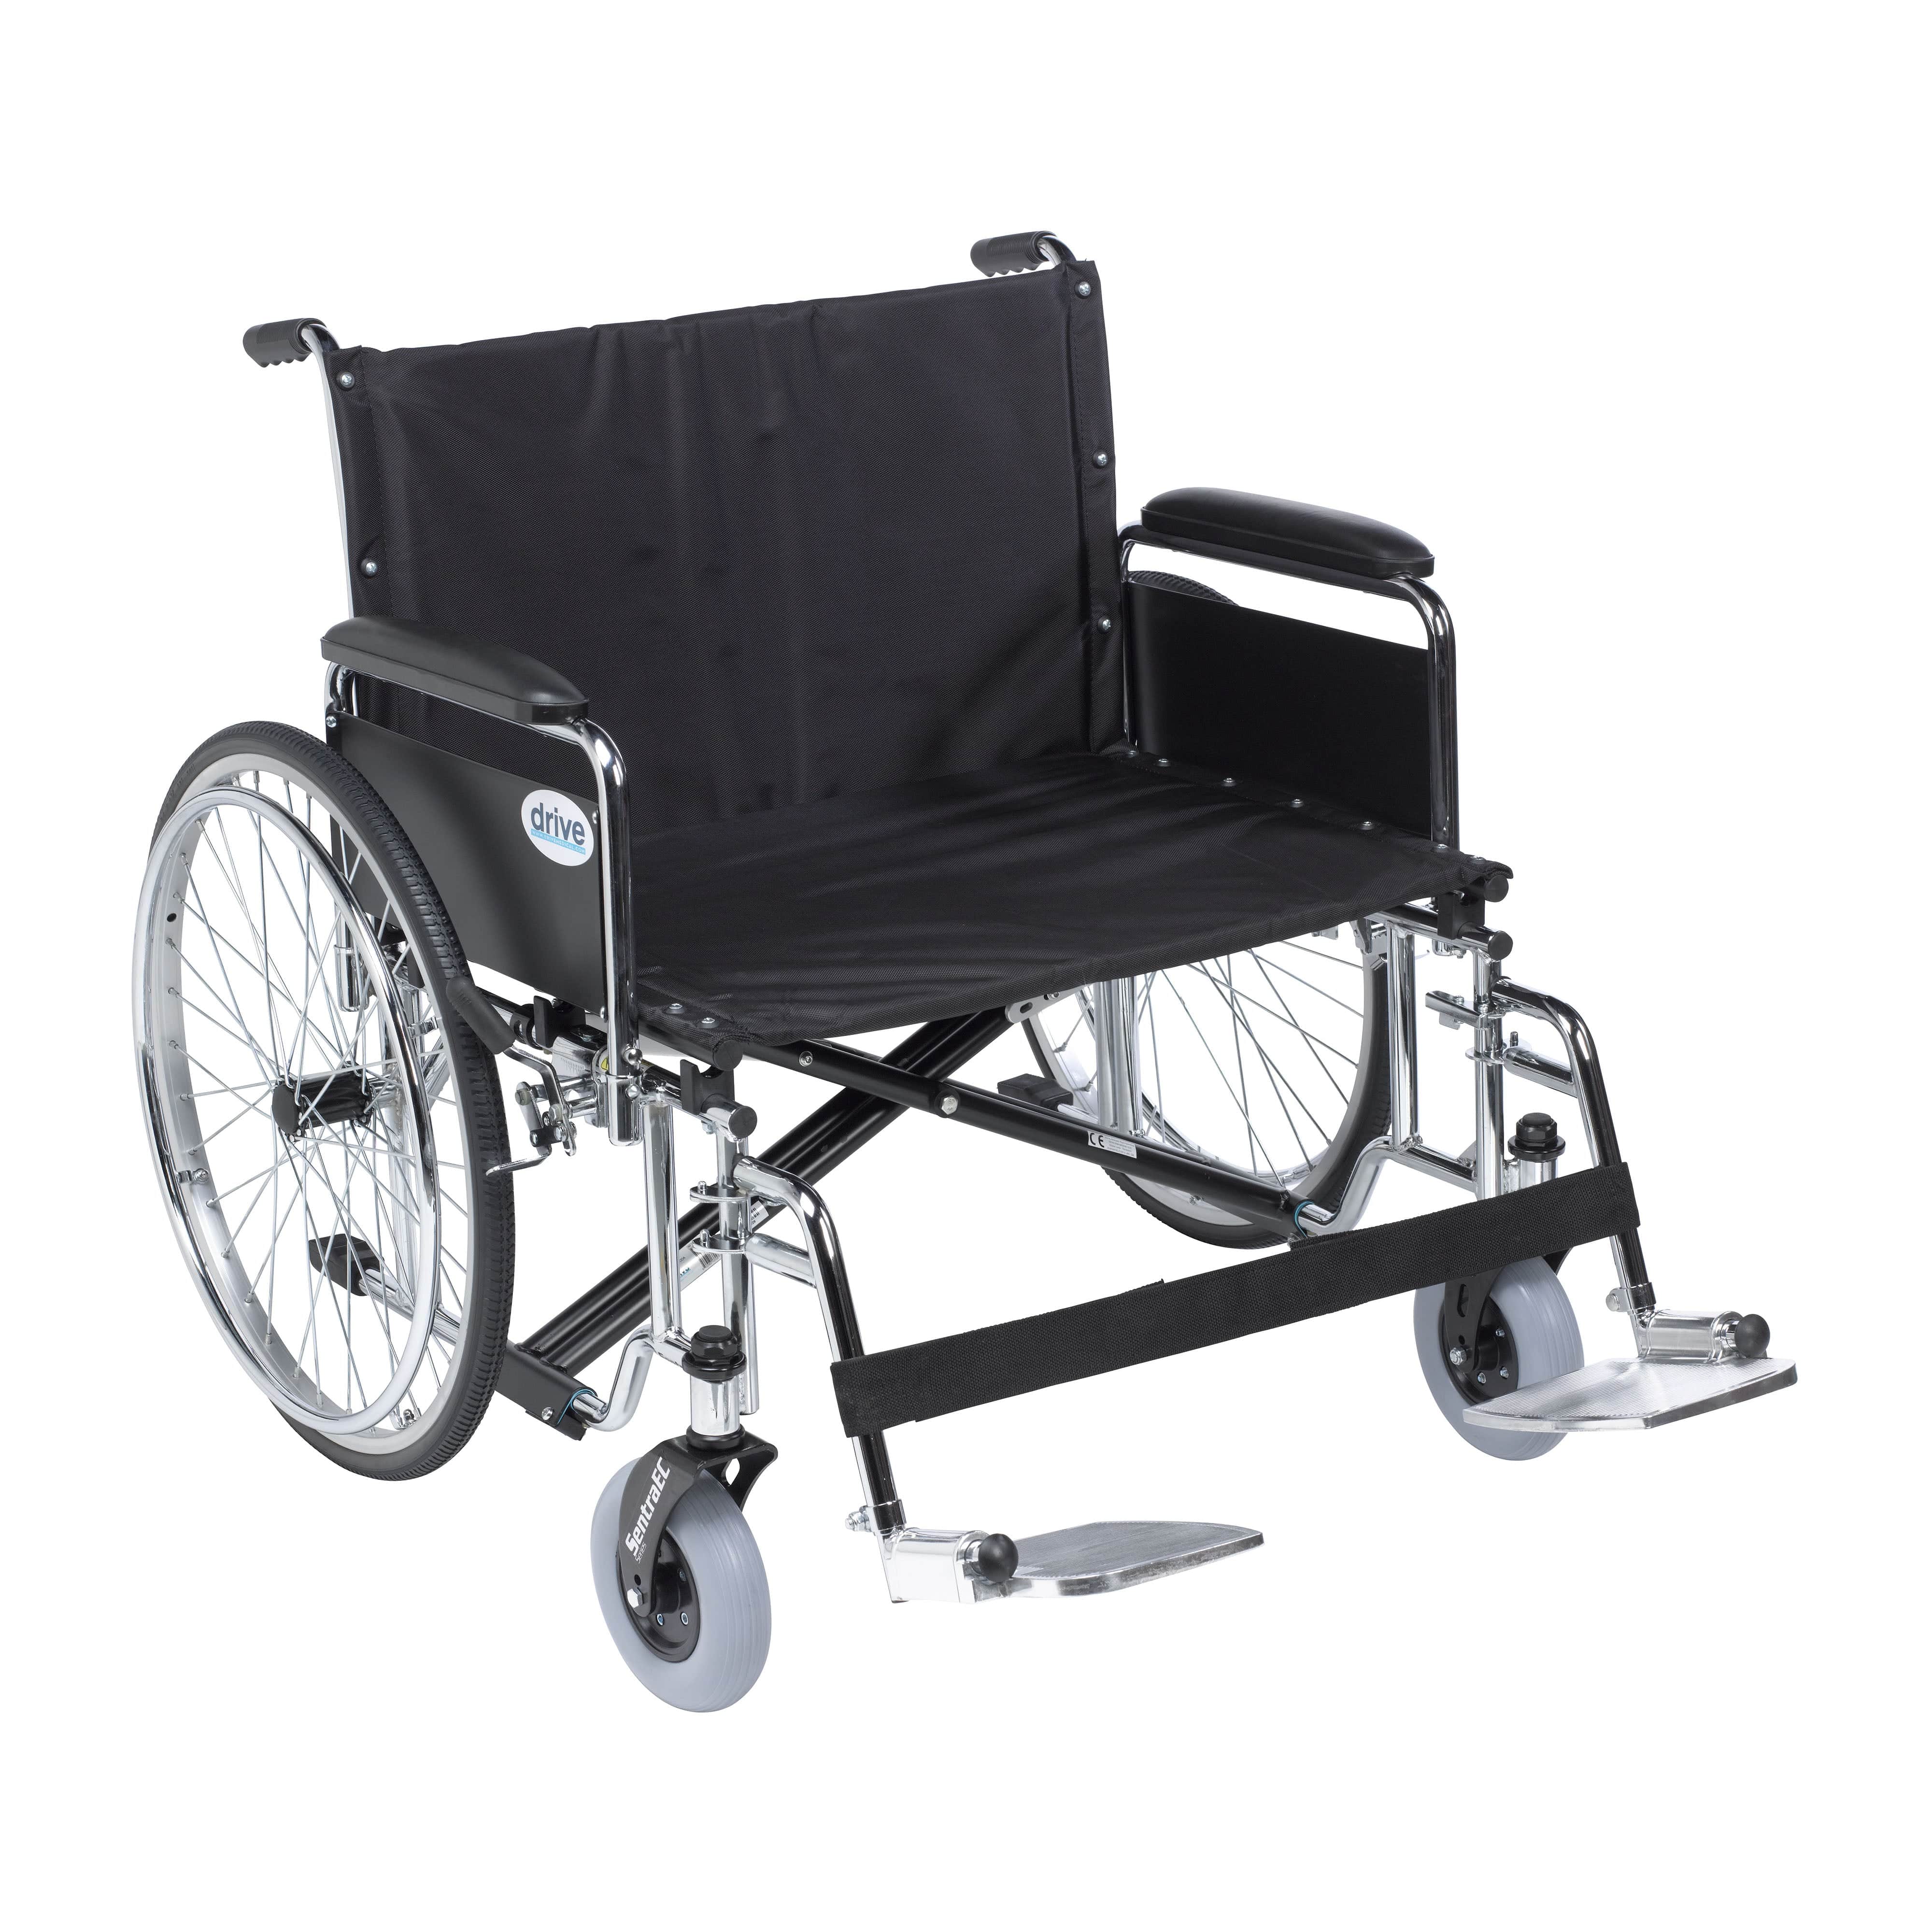 Drive Medical Wheelchairs/Heavy Duty Wheelchairs Detachable Full Arms and Swing Away Foot Rests / 30" Seat Drive Medical Sentra EC Heavy Duty Extra Wide Wheelchair